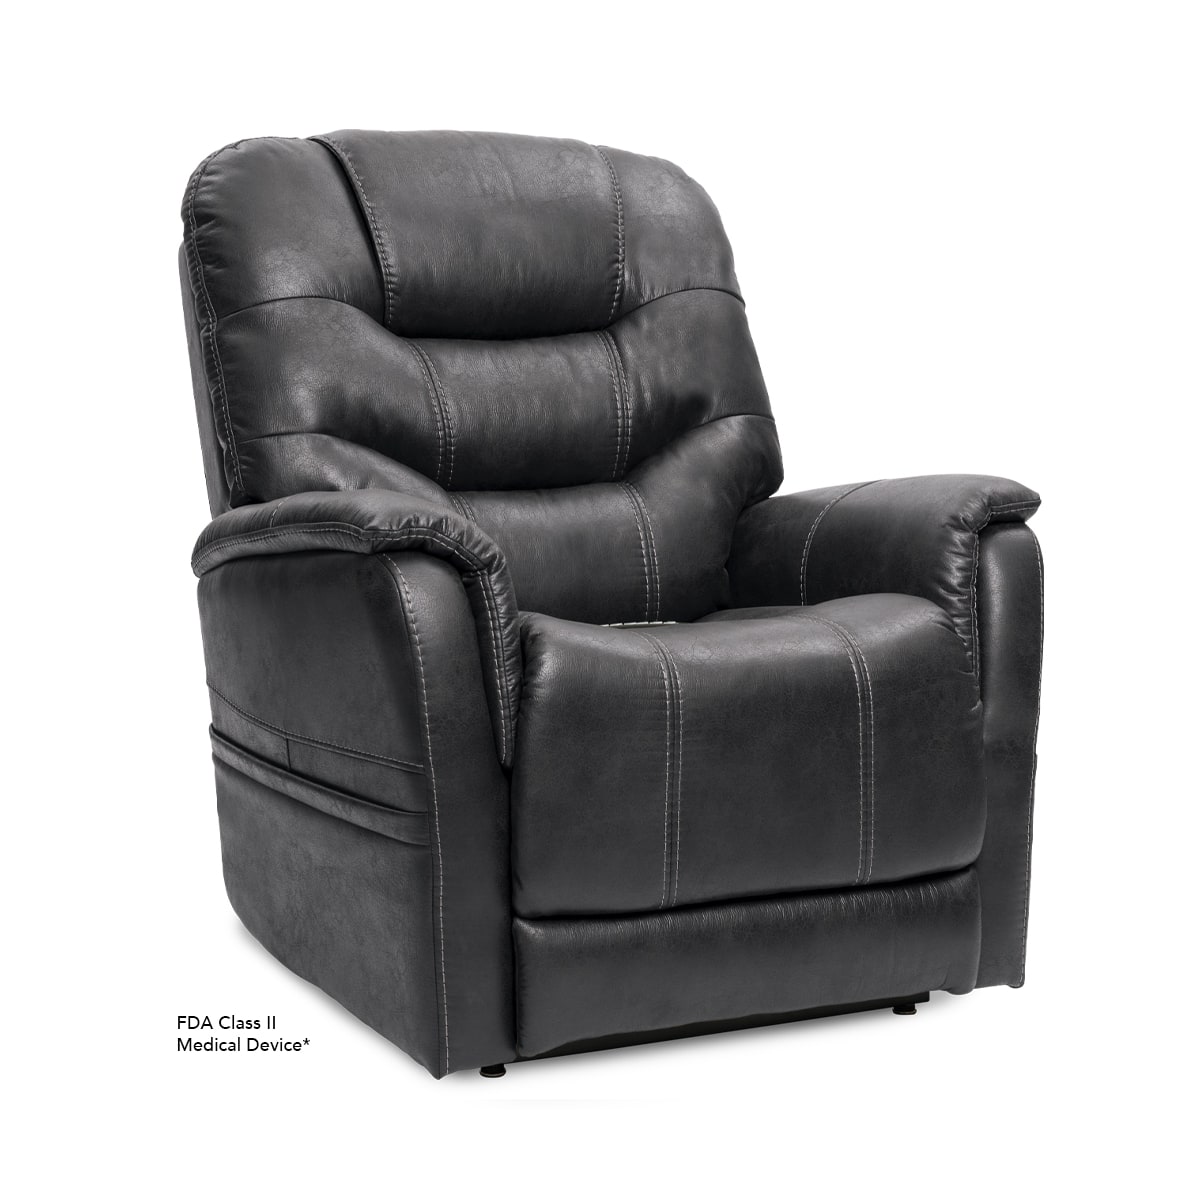 Prive VivaLift Elegance reclining lift chair in black leather